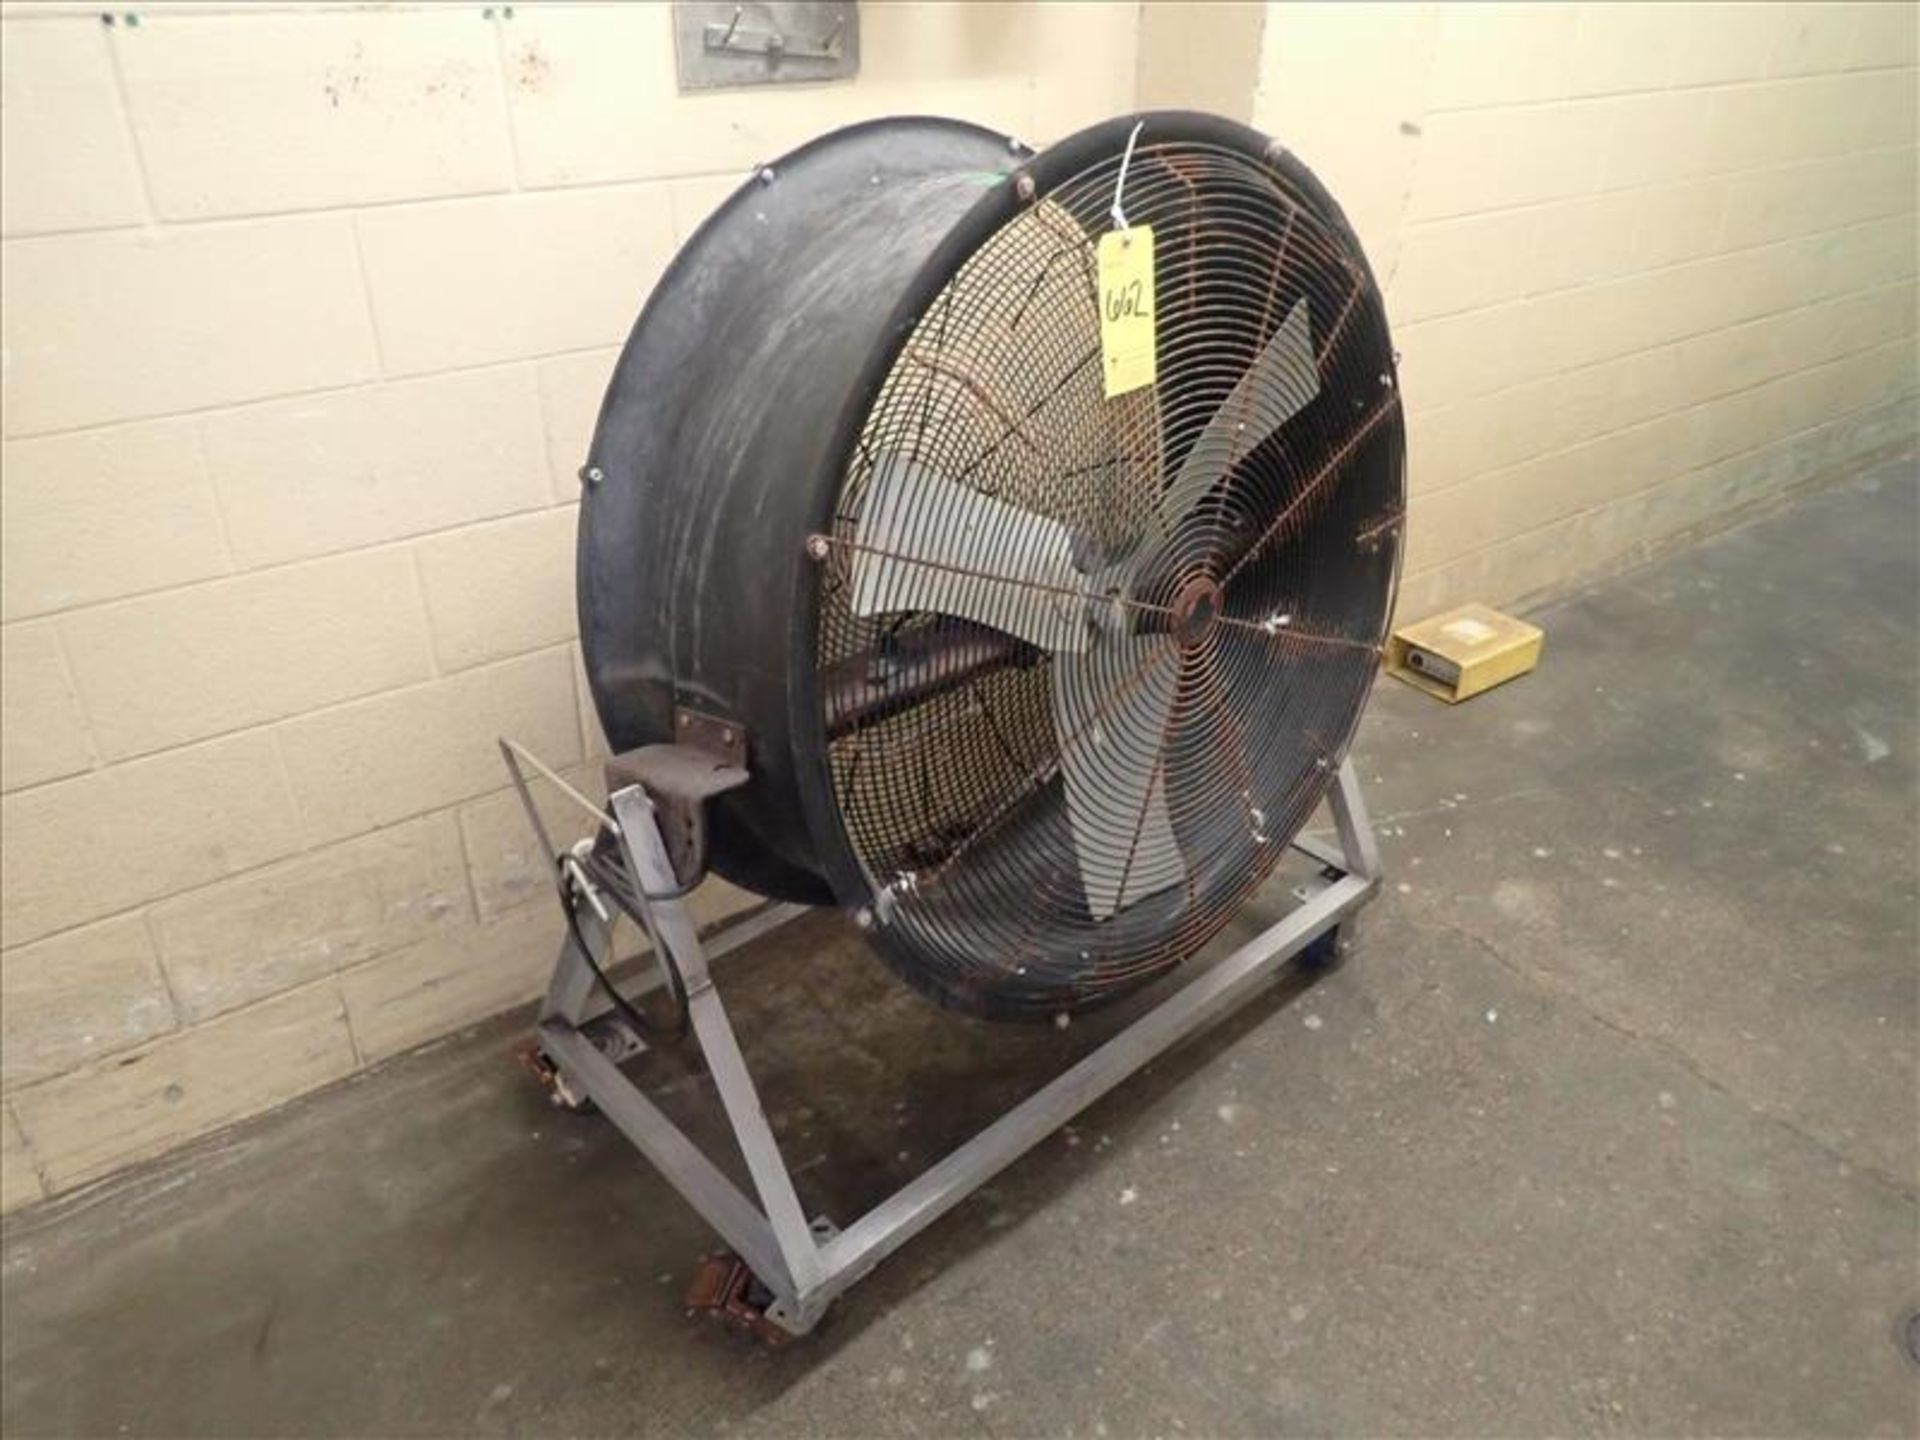 industrial shop fan, 36 in. dia. w/ stainless steel frame and casters [Loc. Warehouse]